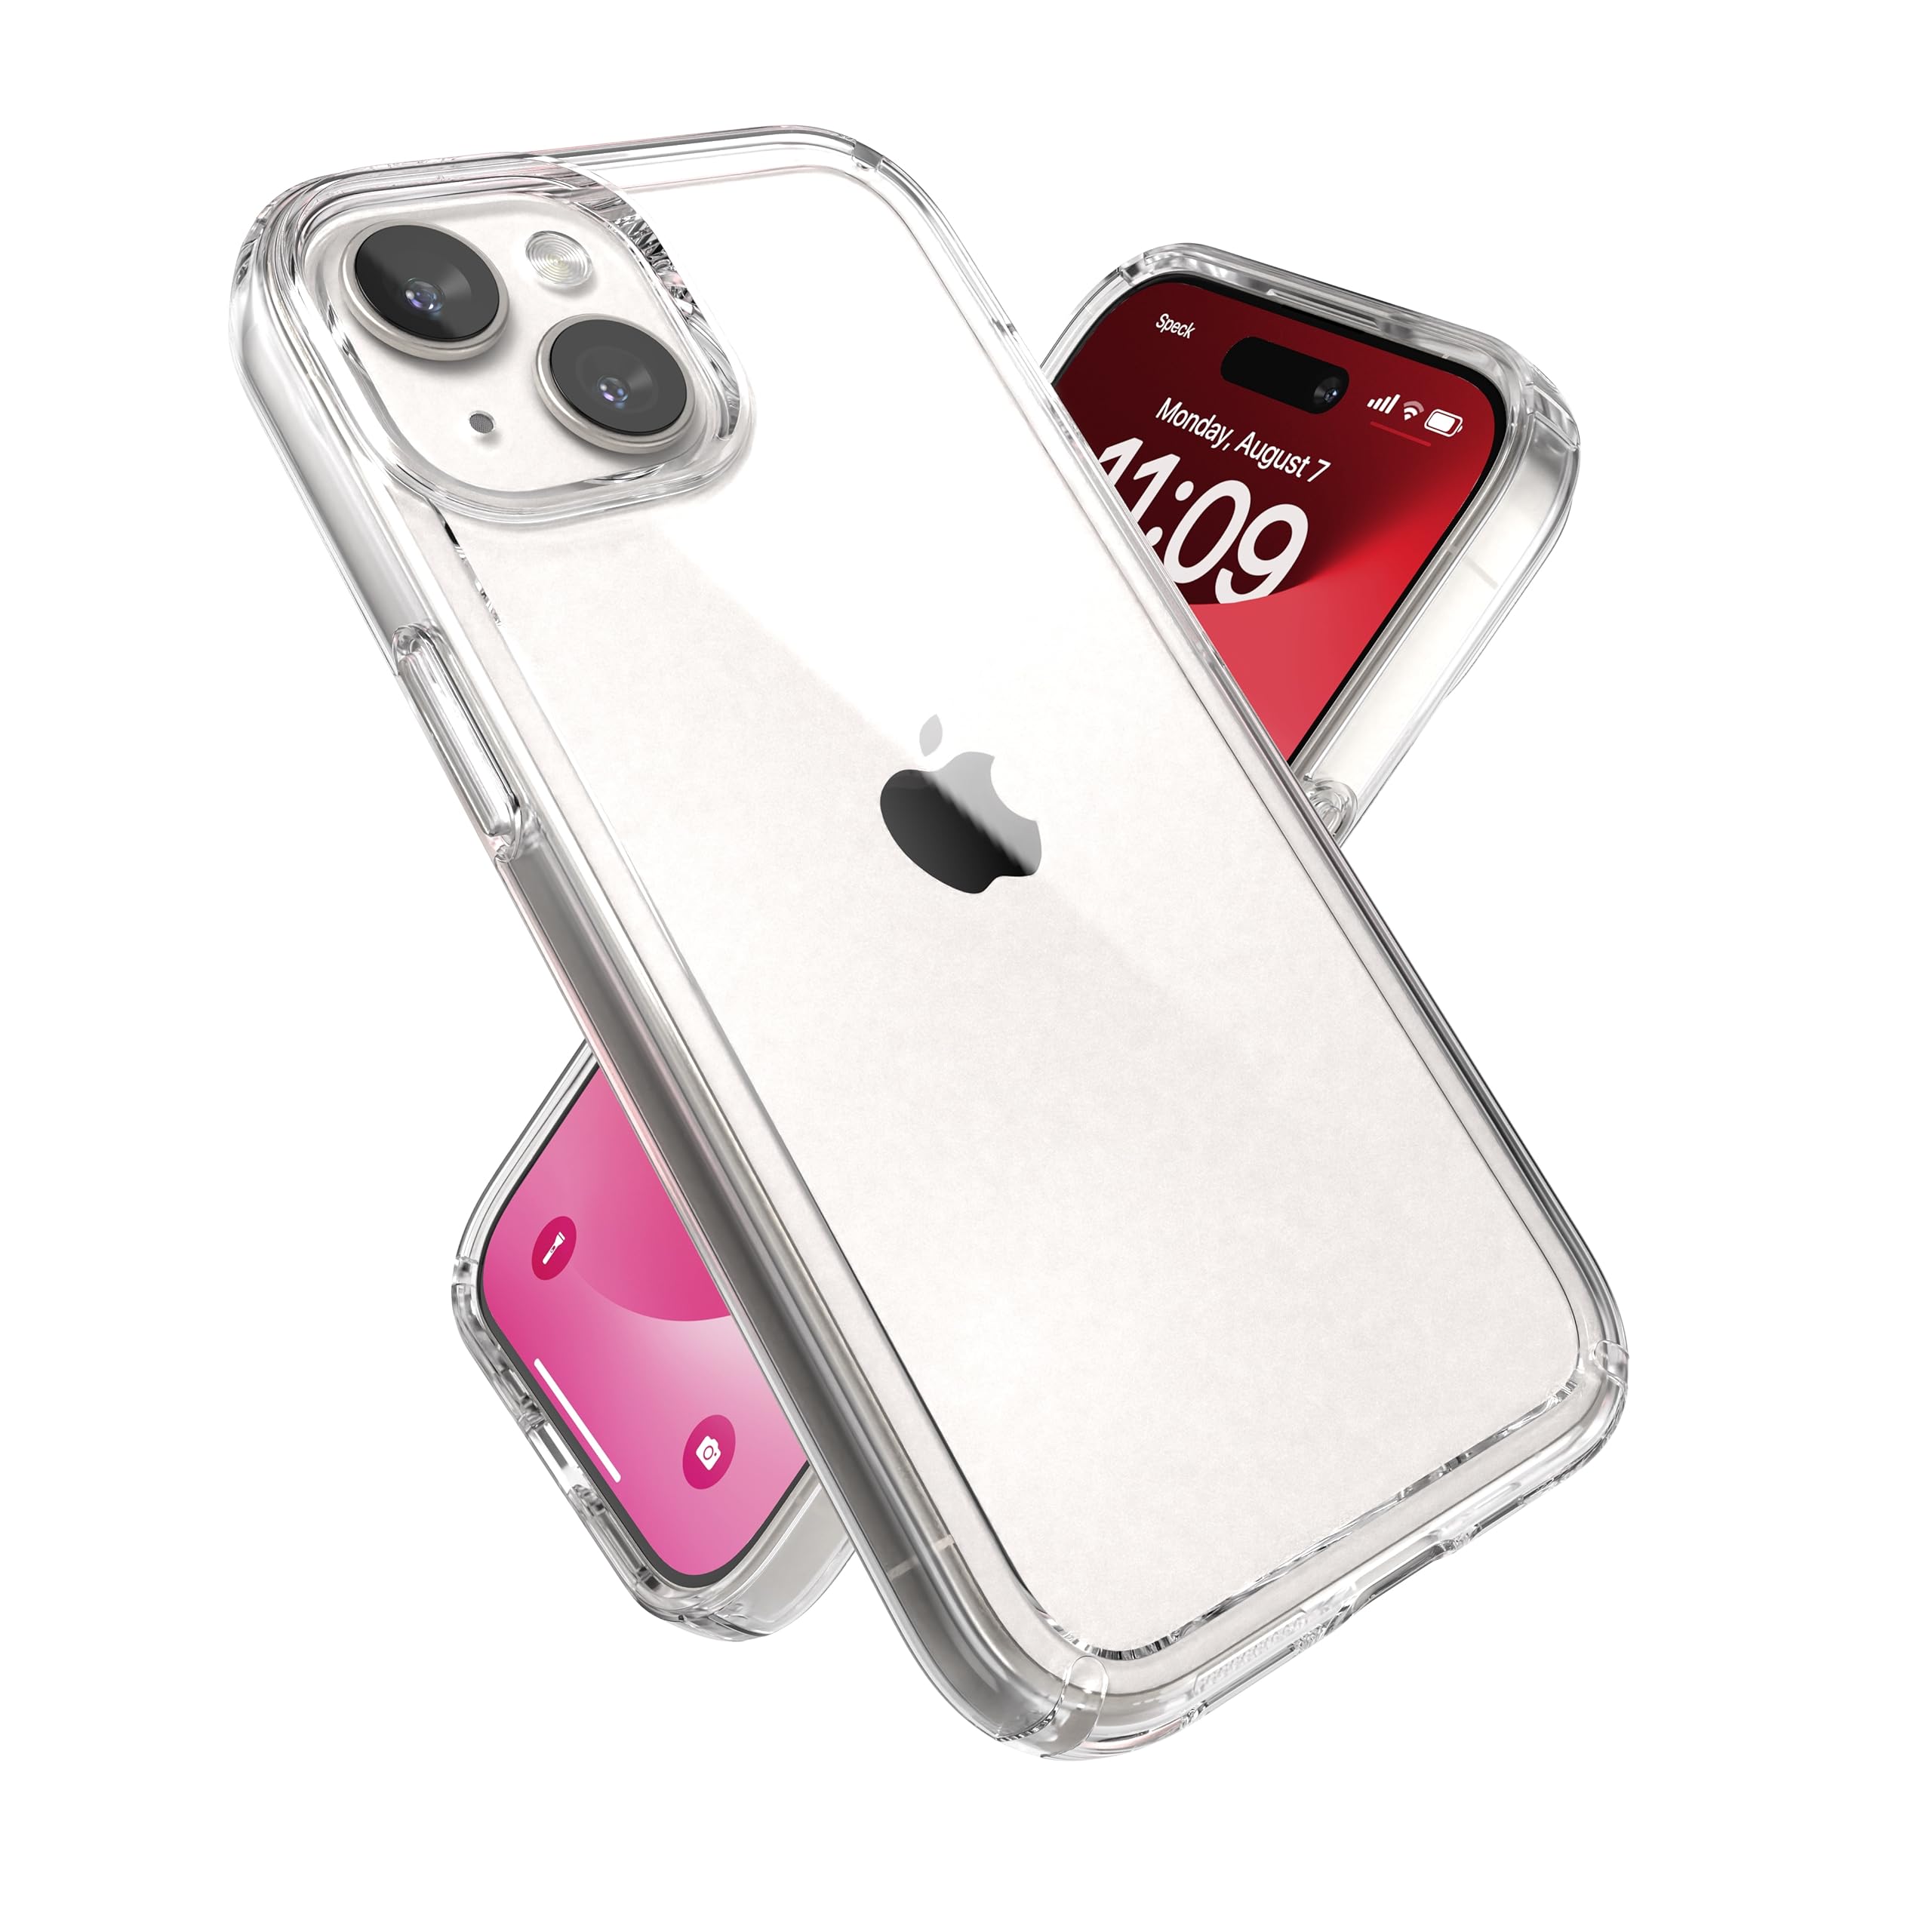 Speck Clear iPhone 15 Case - Slim, MagSafe Compatible, Drop Protection - for iPhone 15, iPhone 14 & iPhone 13 - Scratch Resistant, Anti-Yellowing, 6.1 Inch Phone Case - GemShell Clear